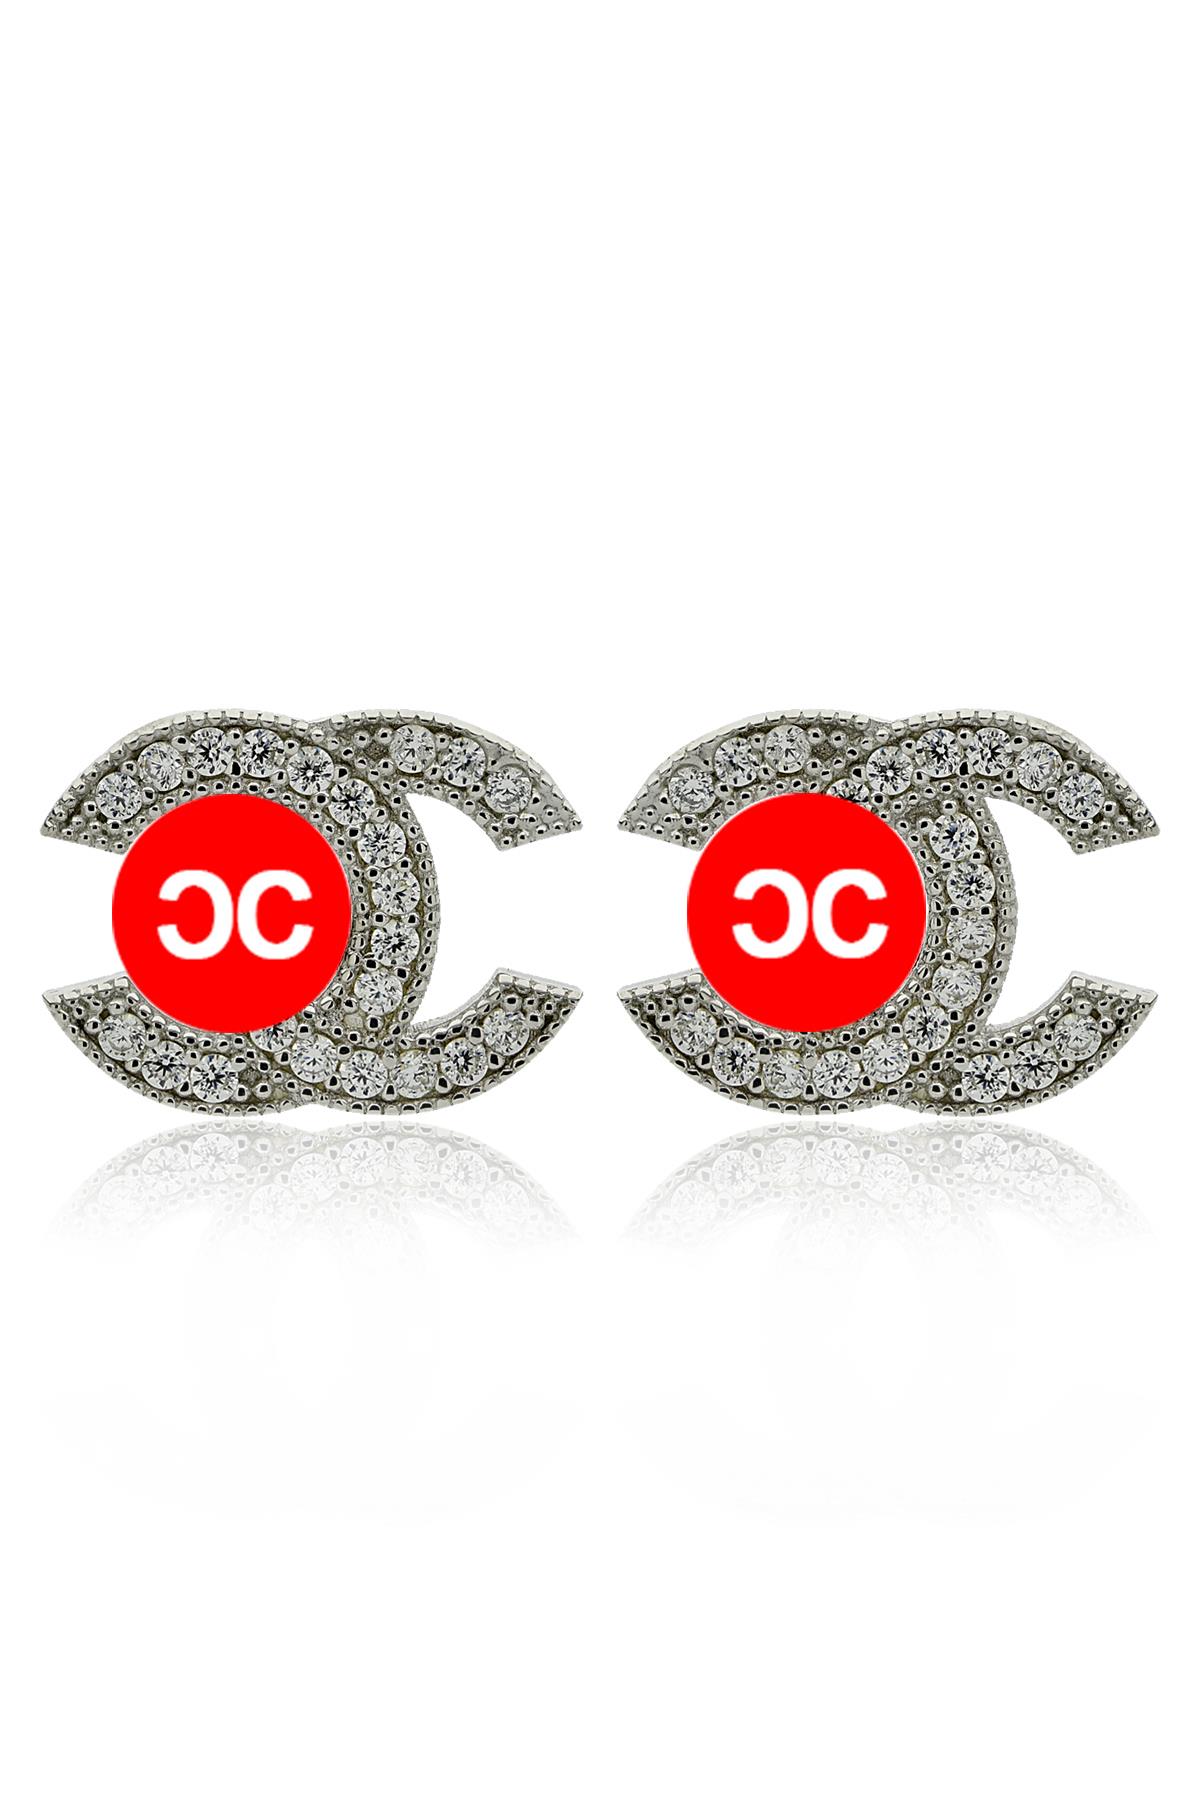 925 Silver Fashion Double C Stud Earring for Women Luxury High Quality Creative Design Fine Jewelry